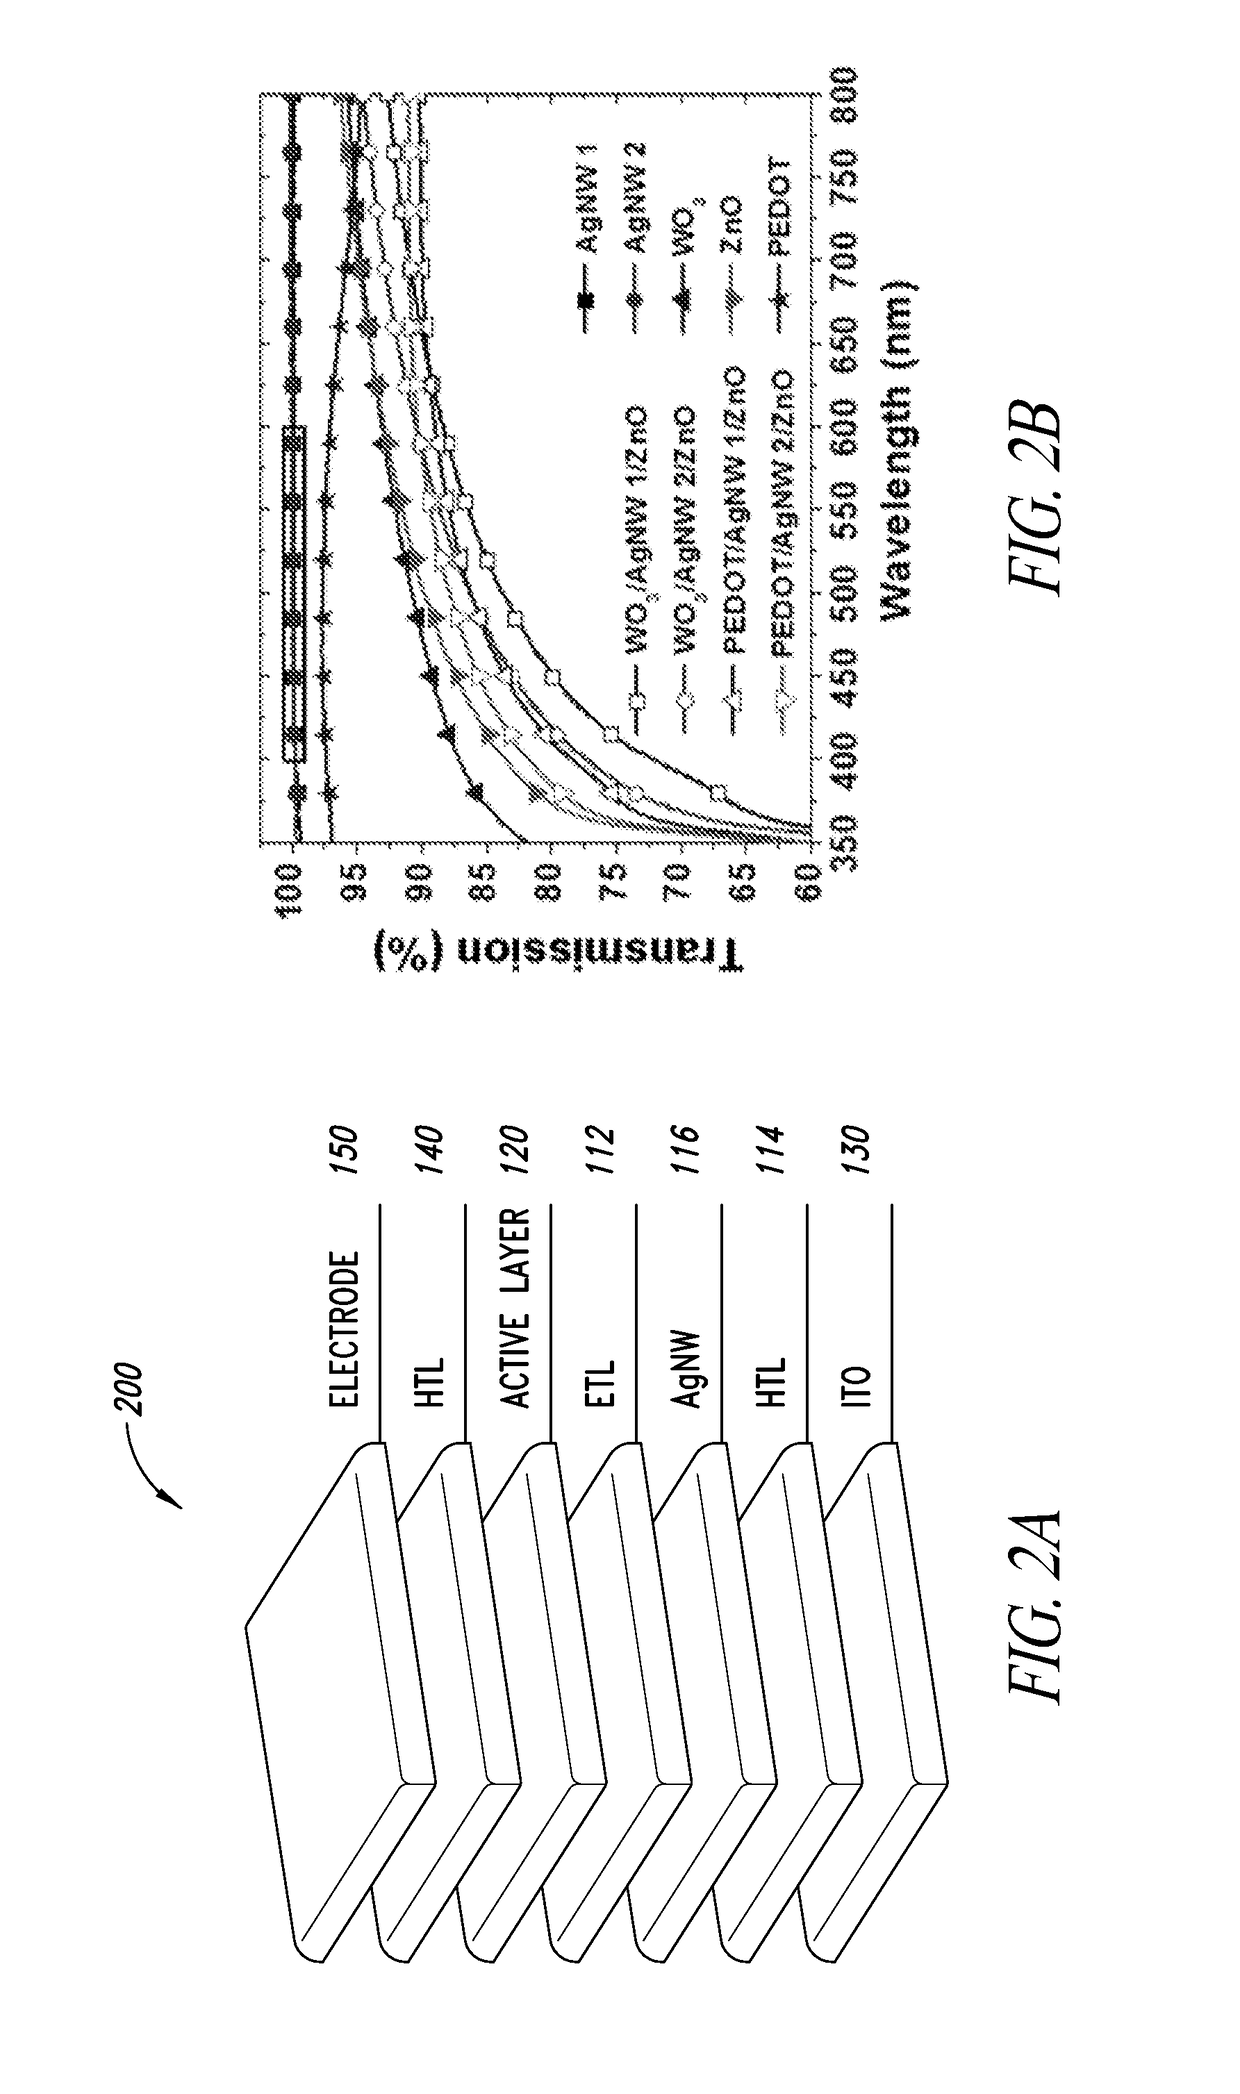 Tandem organic photovoltaic devices that include a metallic nanostructure recombination layer